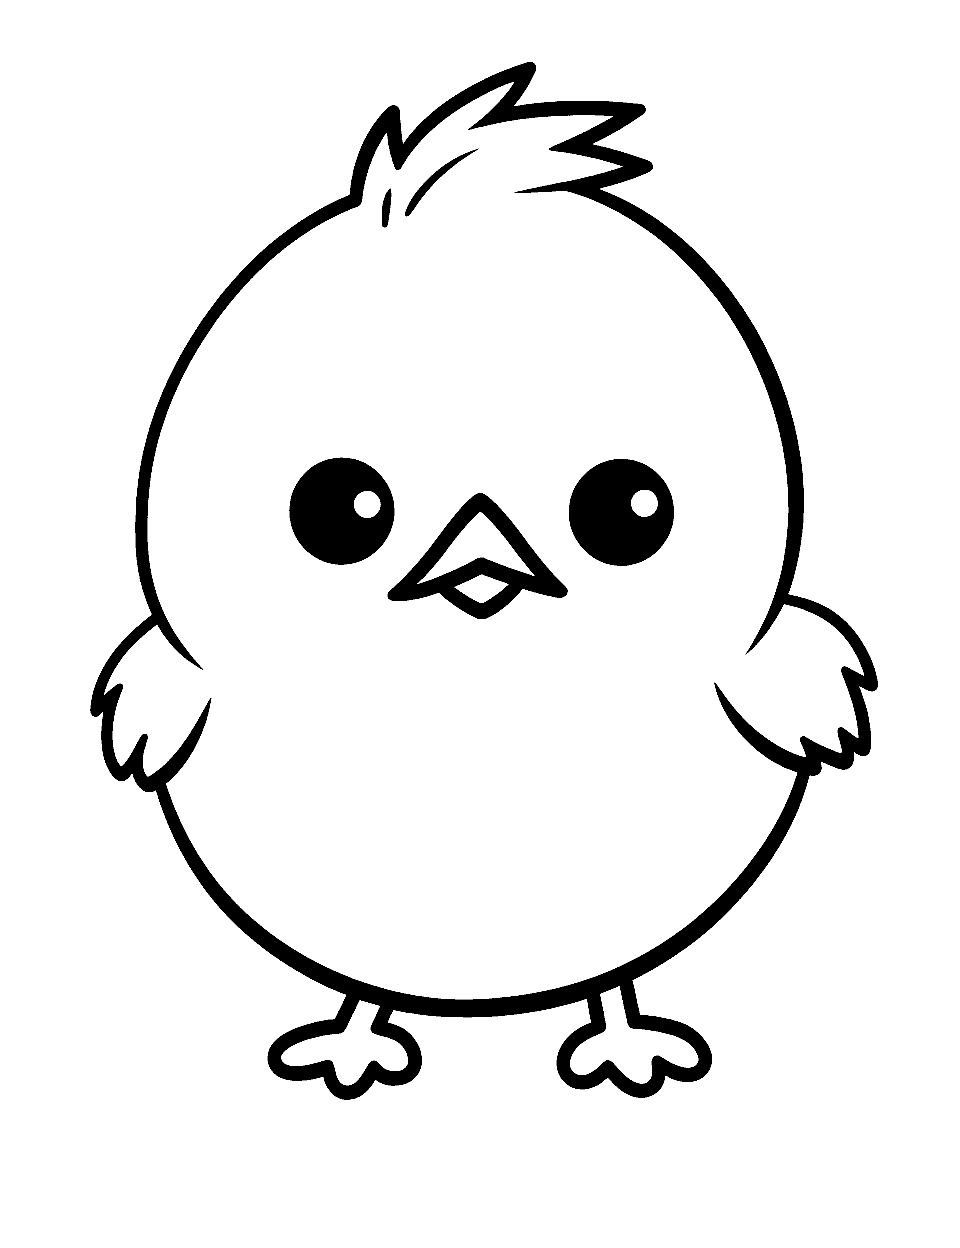 Kawaii Chick Easter Coloring Page - An adorable, chubby chick with thick lines and easy to color.